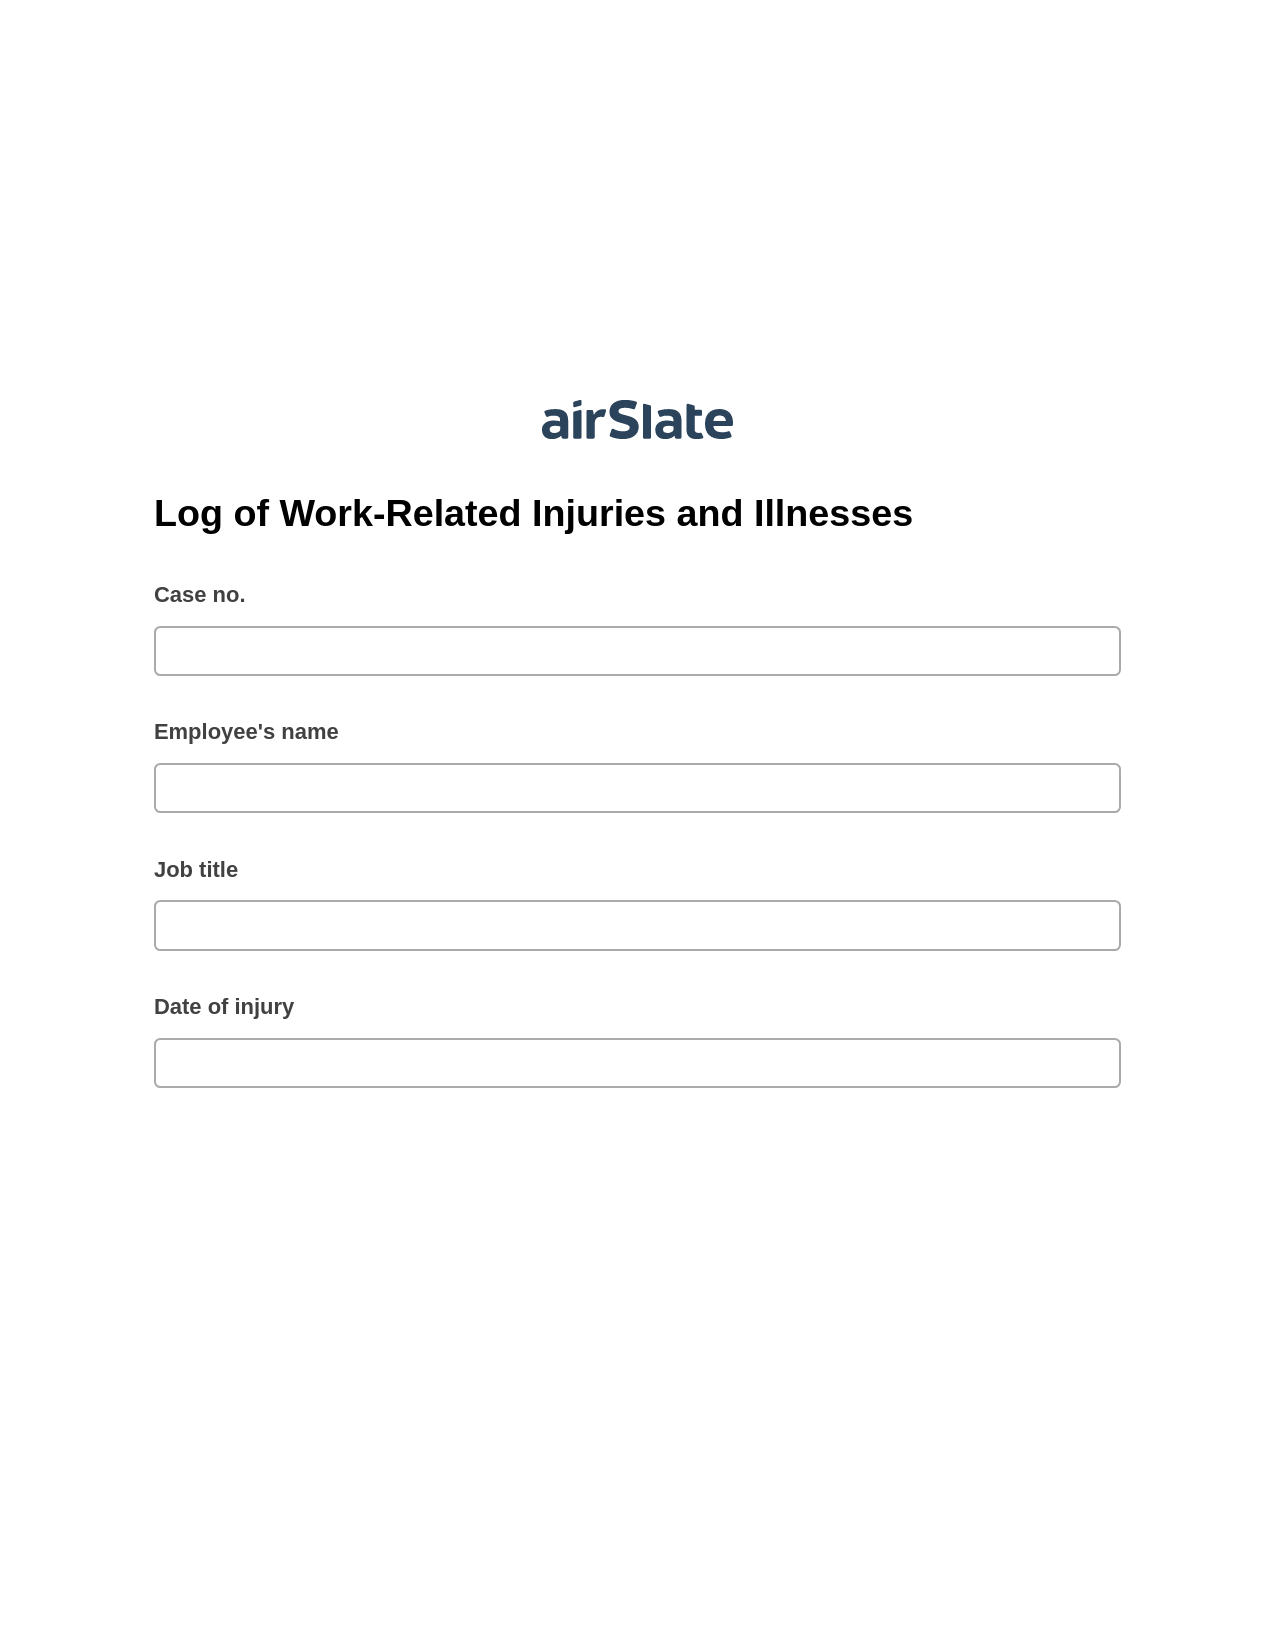 Log of Work-Related Injuries and Illnesses Pre-fill Dropdown from Airtable, Remove Tags From Slate Bot, Export to MySQL Bot